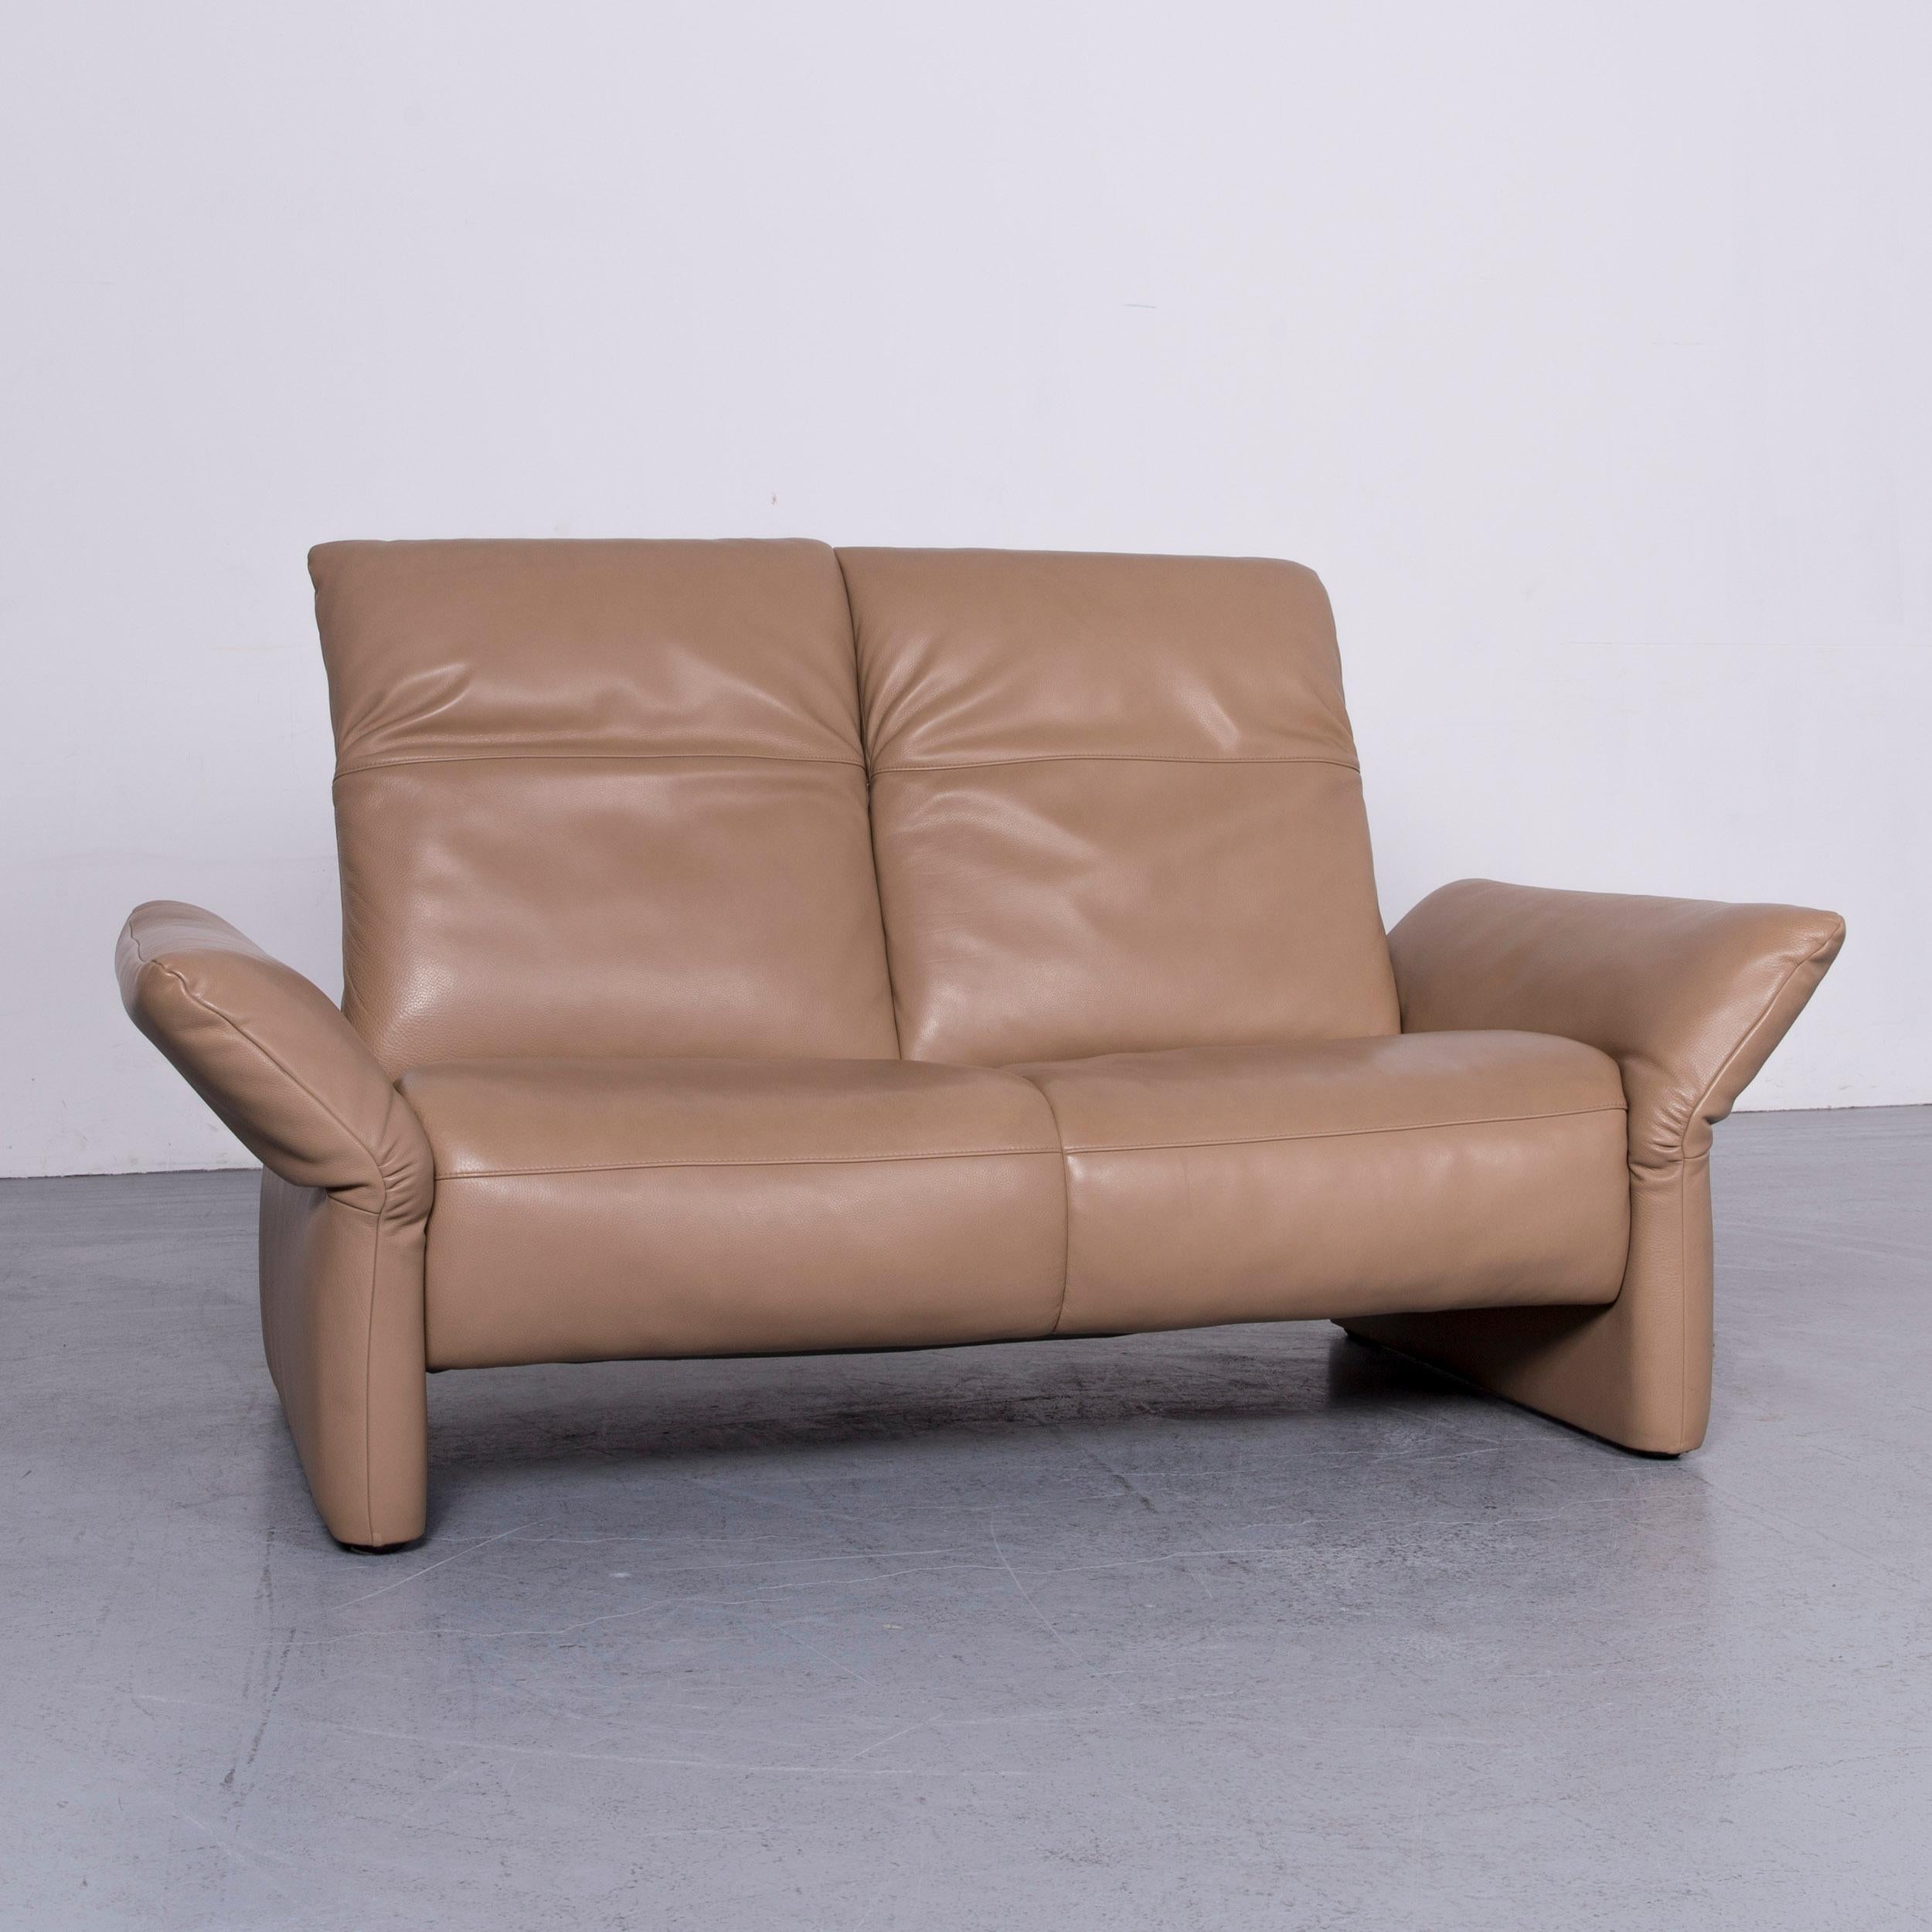 We bring to you a Koinor Elena designer two-seat sofa beige leather function couch.